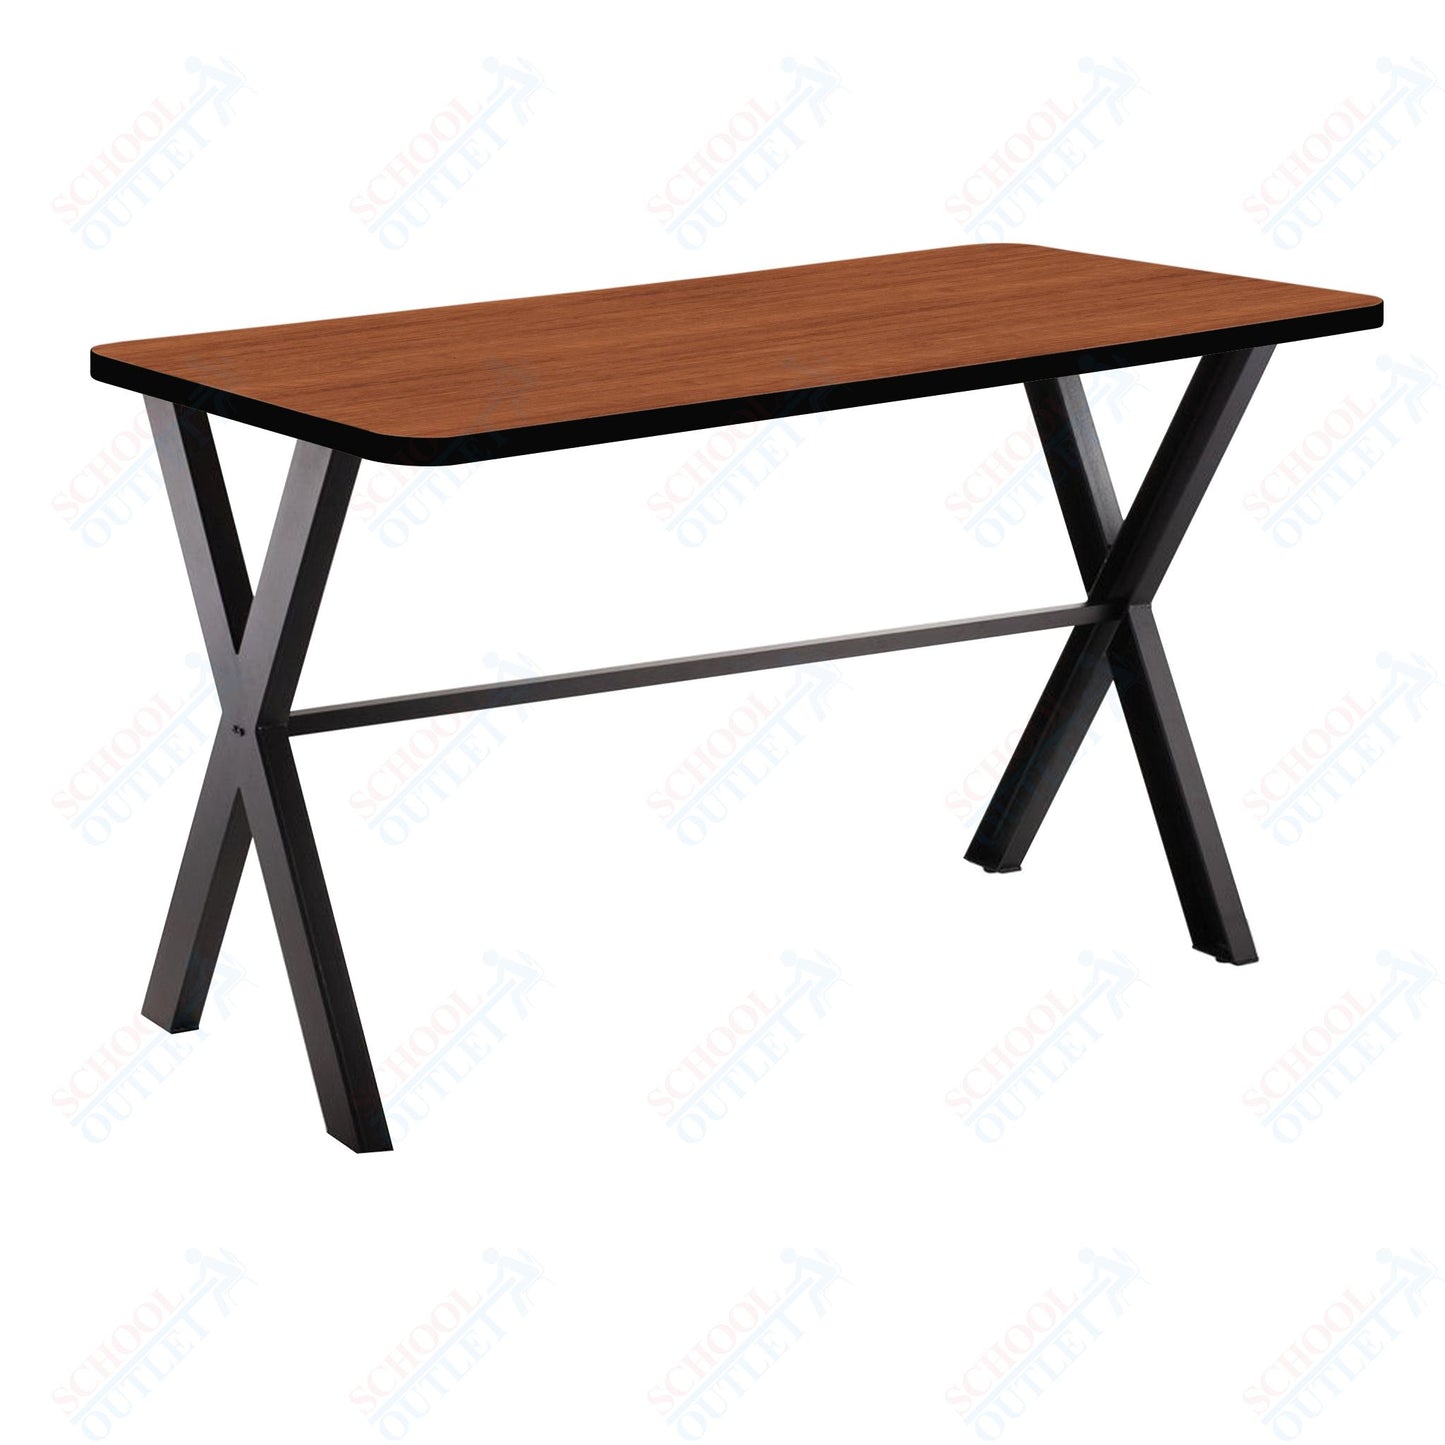 NPS CLT3060D2 - Collaborator Table, 30"x 60" Rectangle, 30" Height w/ Crossbeam, High Pressure Laminate Top (National Public Seating NPS-CLT3060D2)